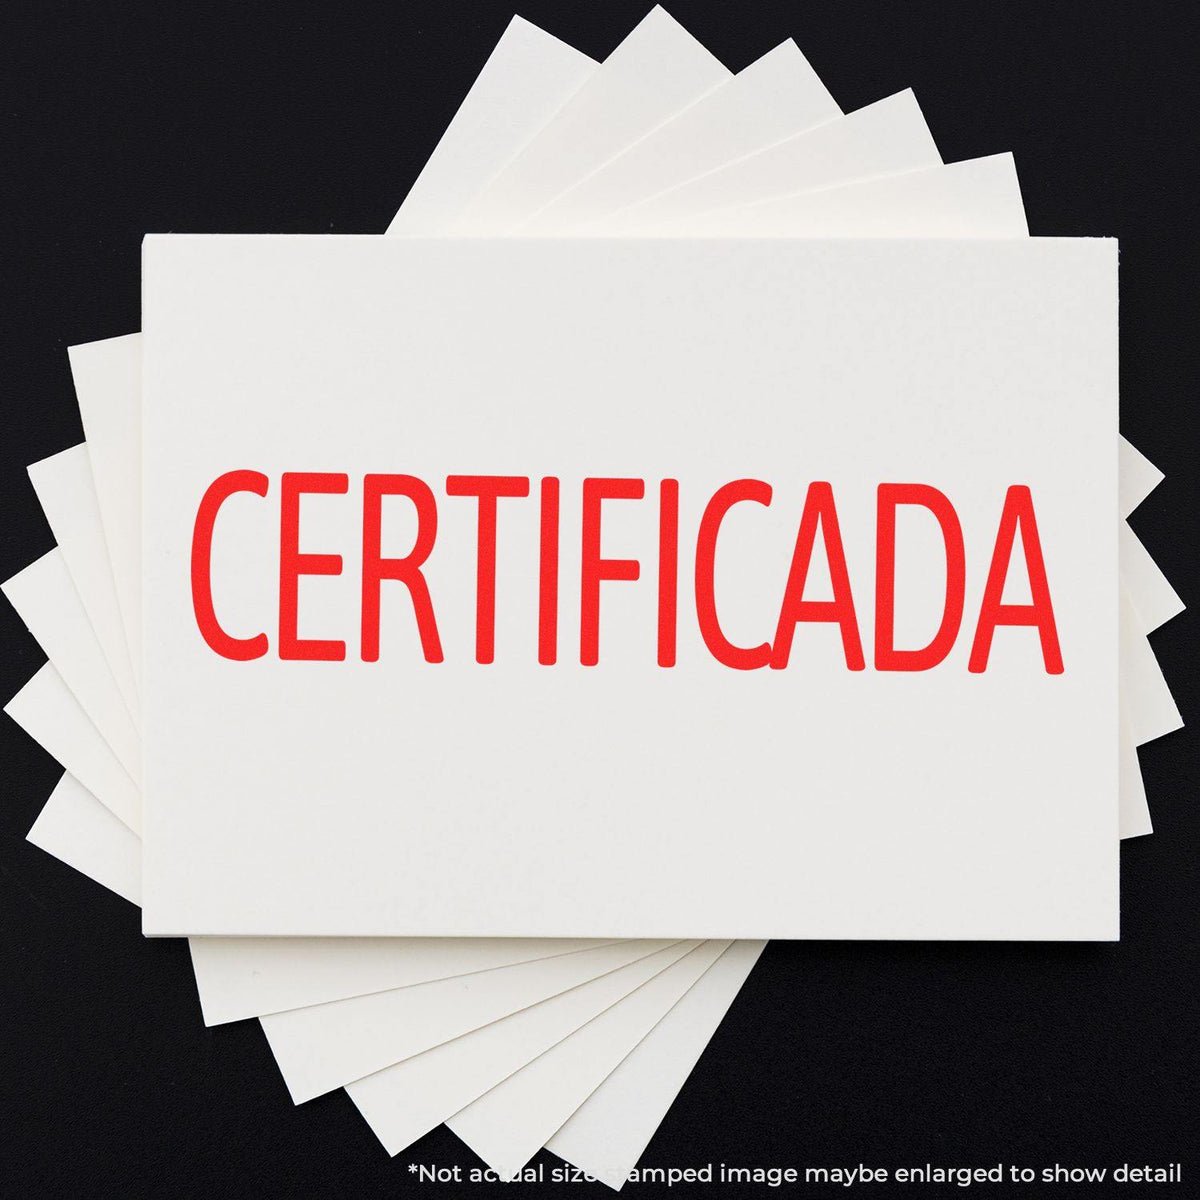 Large Self-Inking Certificada Stamp In Use Photo